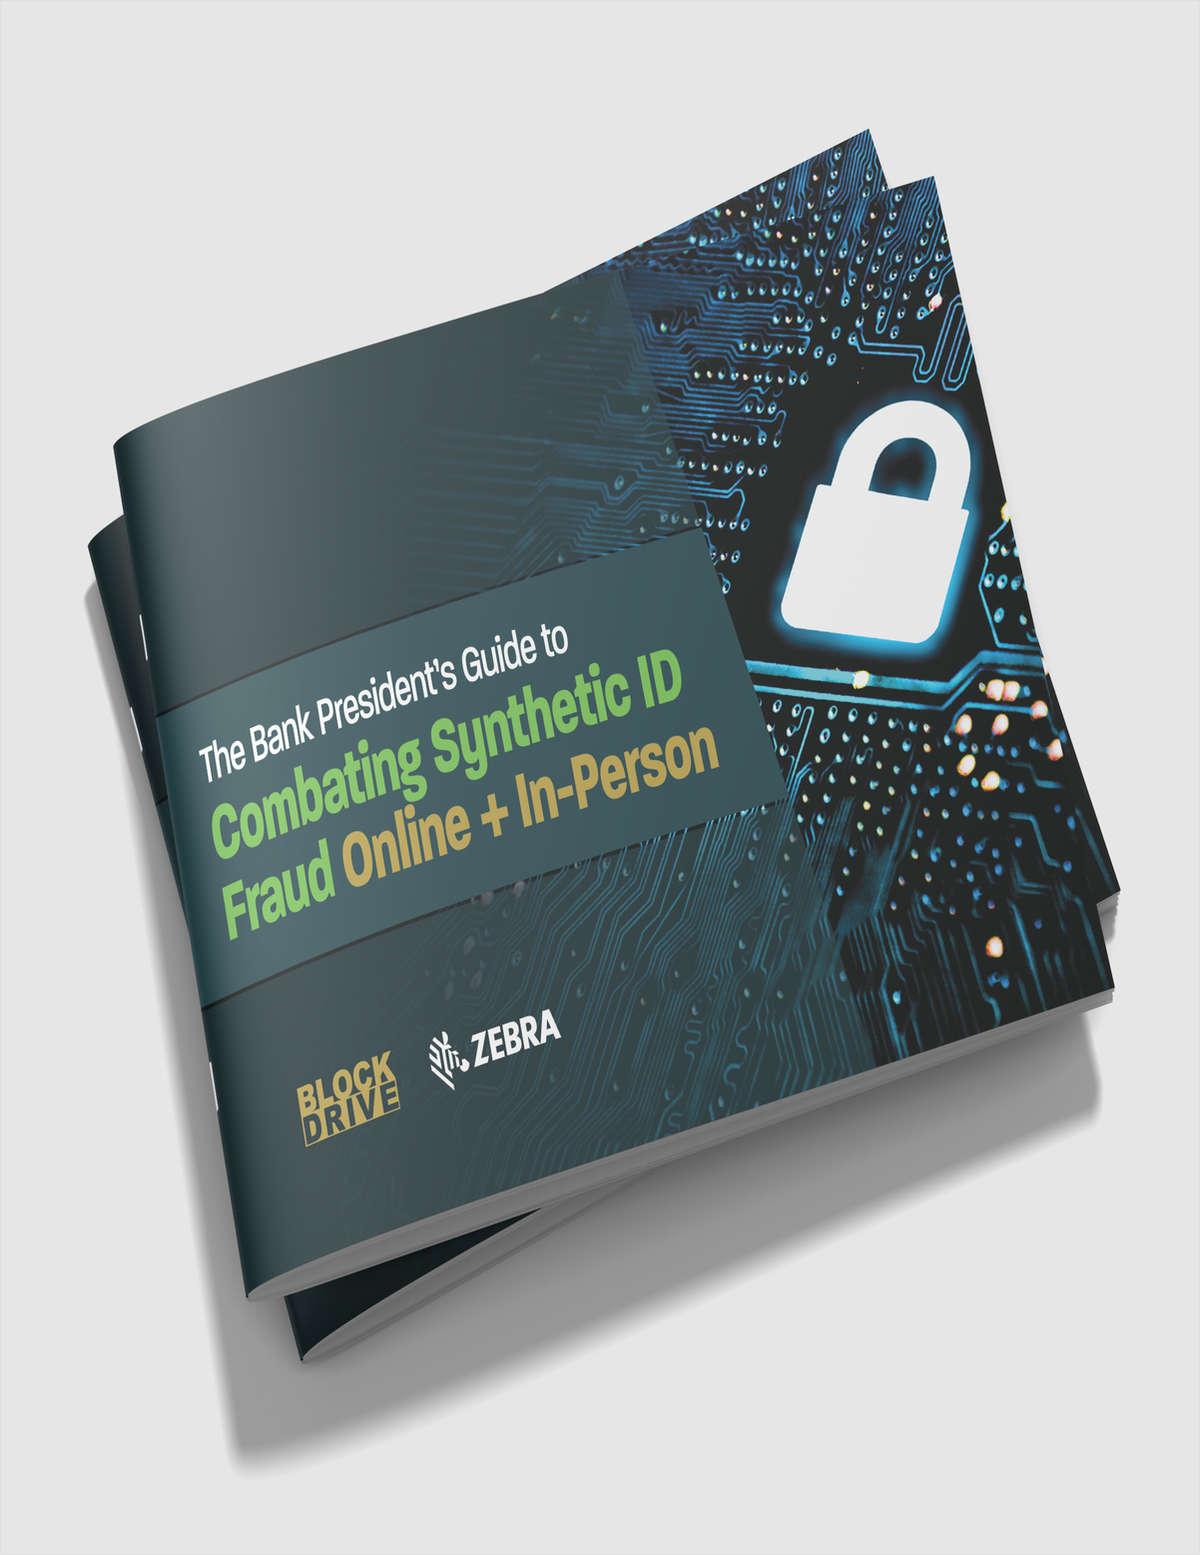 The Bank President's Guide to Combating Synthetic ID Fraud Online and In-Person